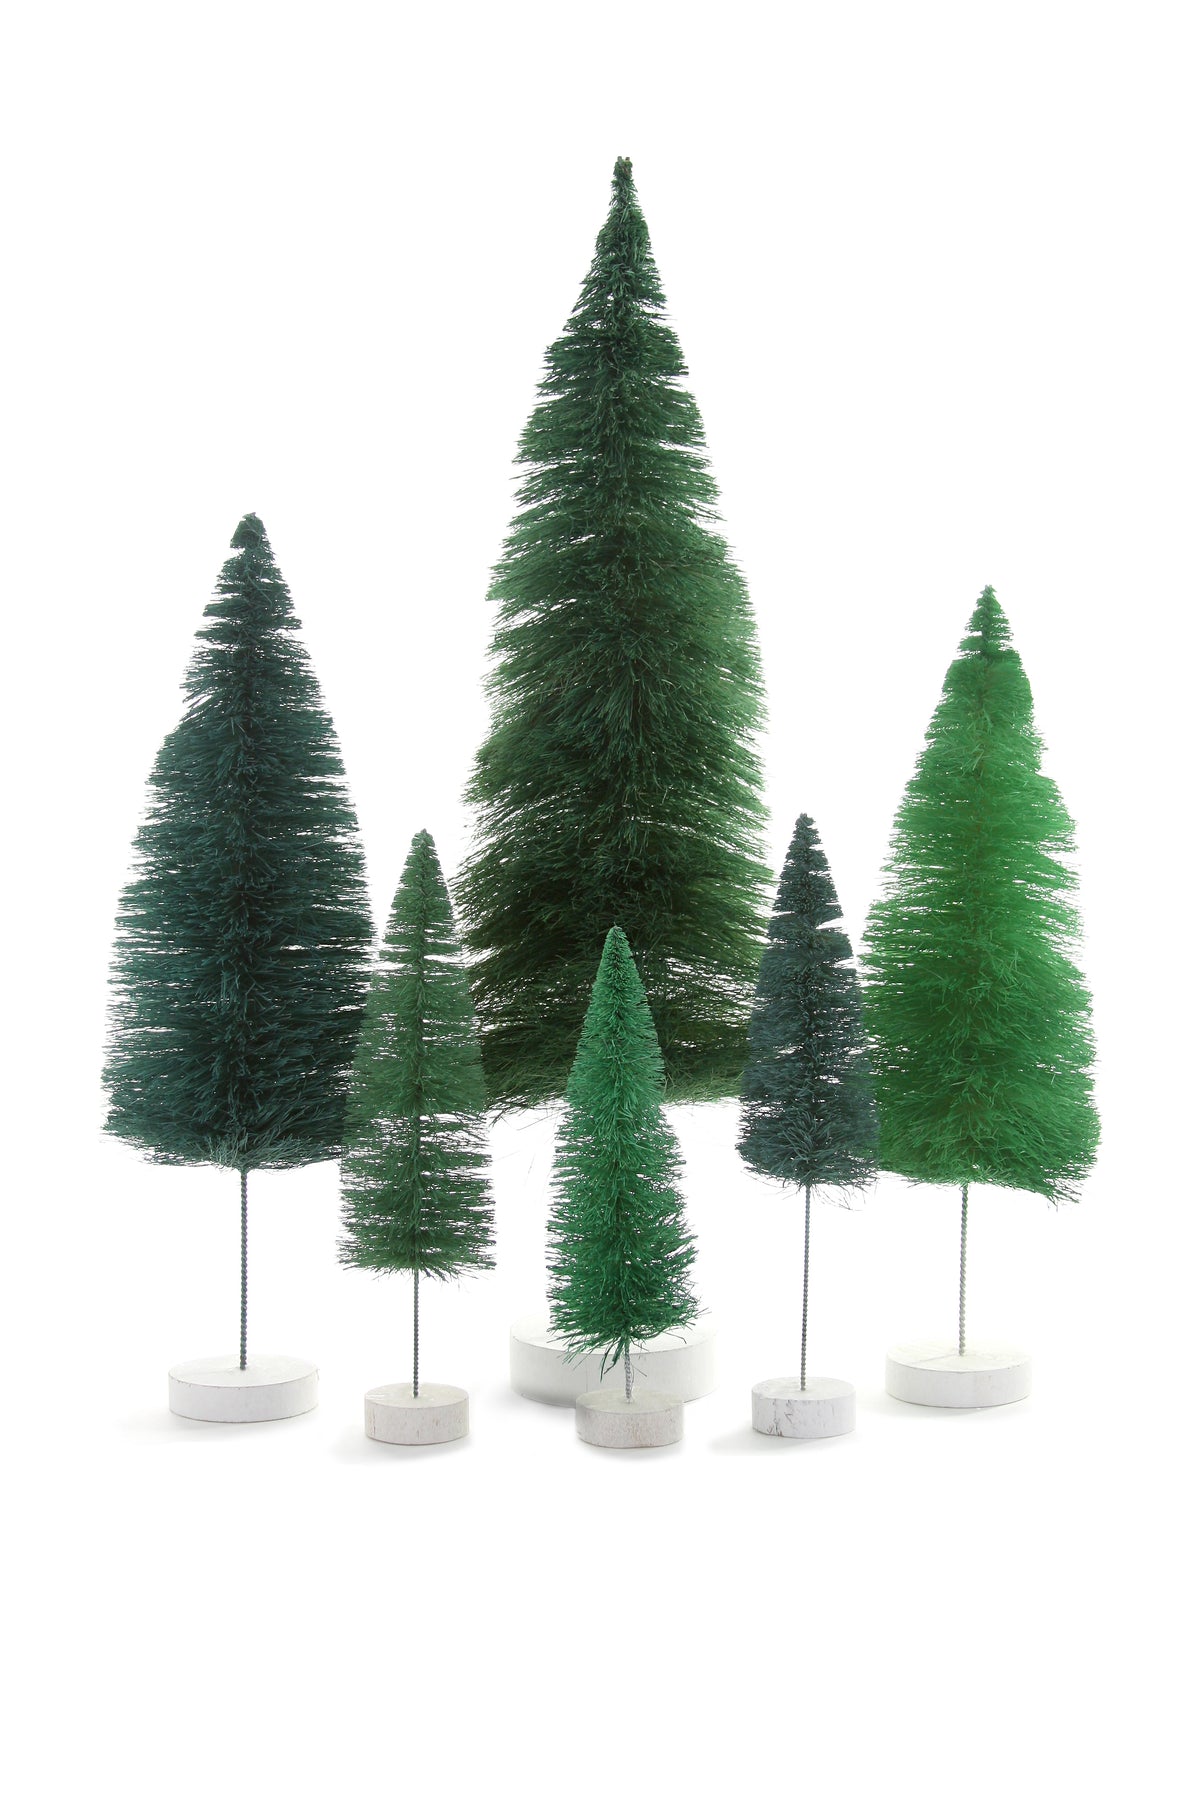 Shop Rainbow Trees Set of 6 in Various Colors | Burke Decor